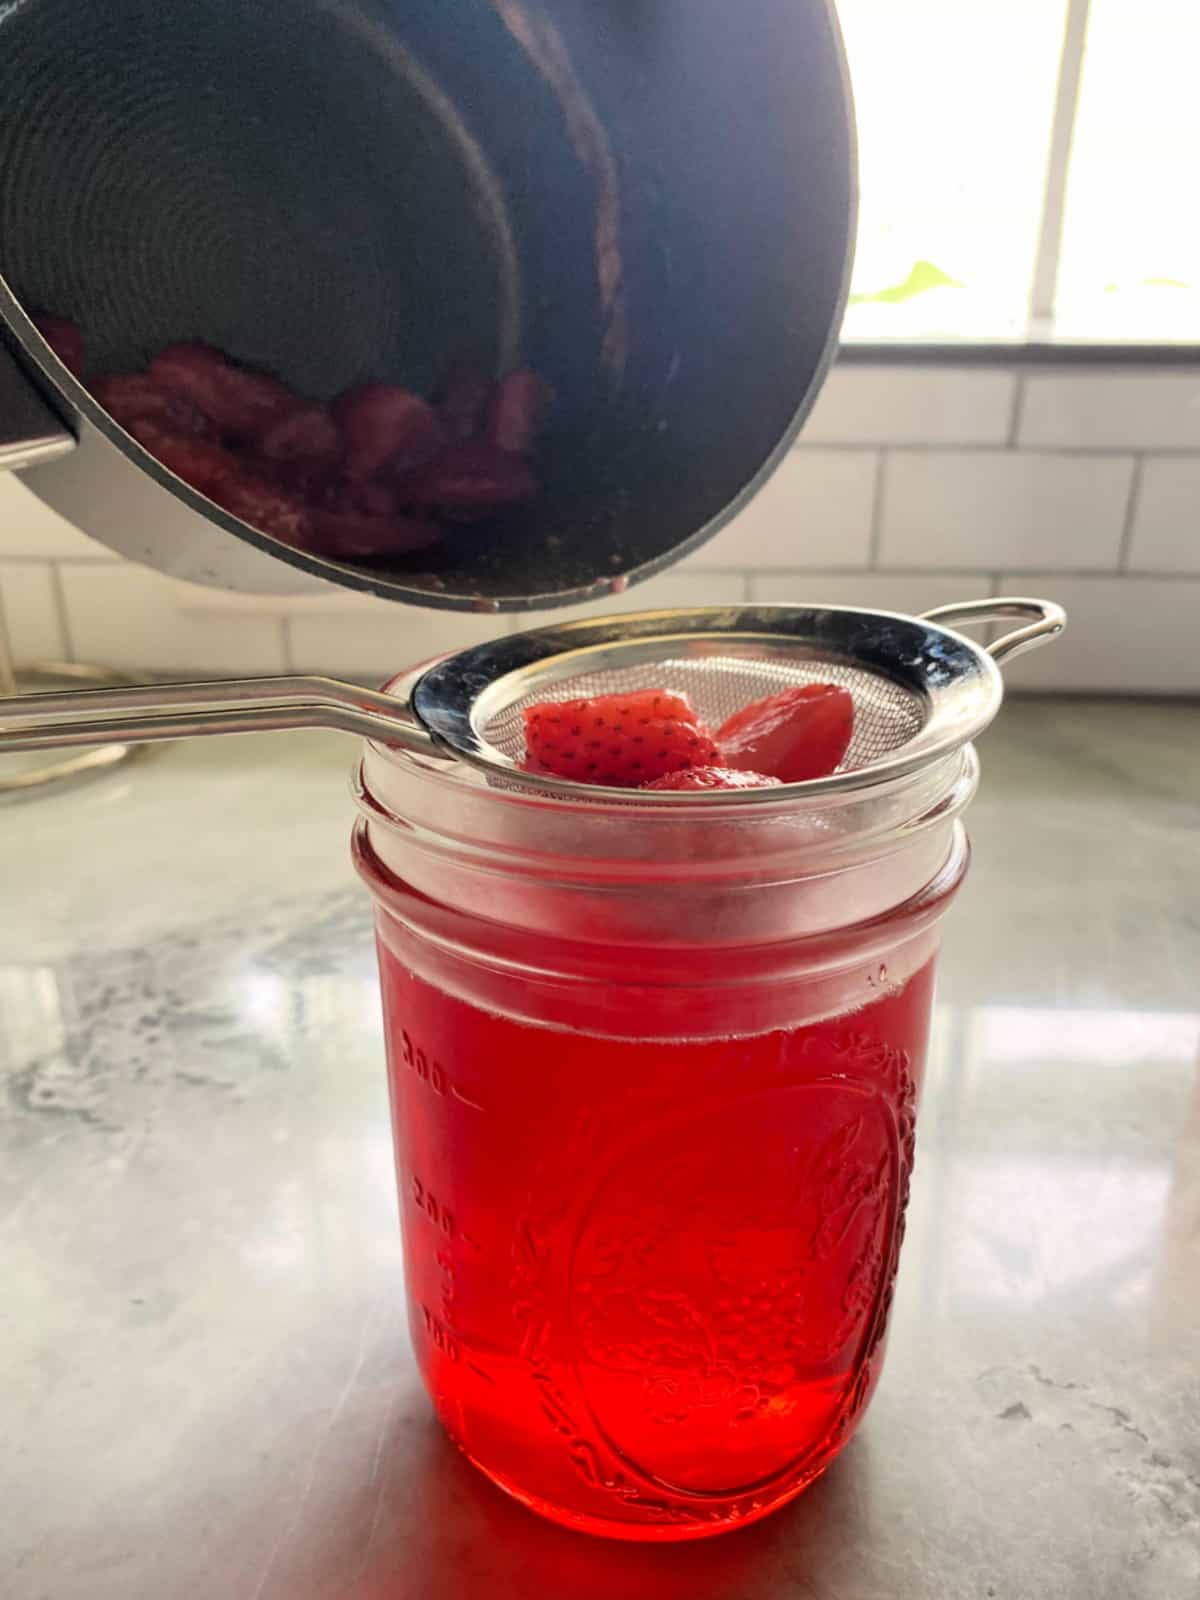 B lack pot pouring liquid and strawberries over a strainer on a glass mason jar.